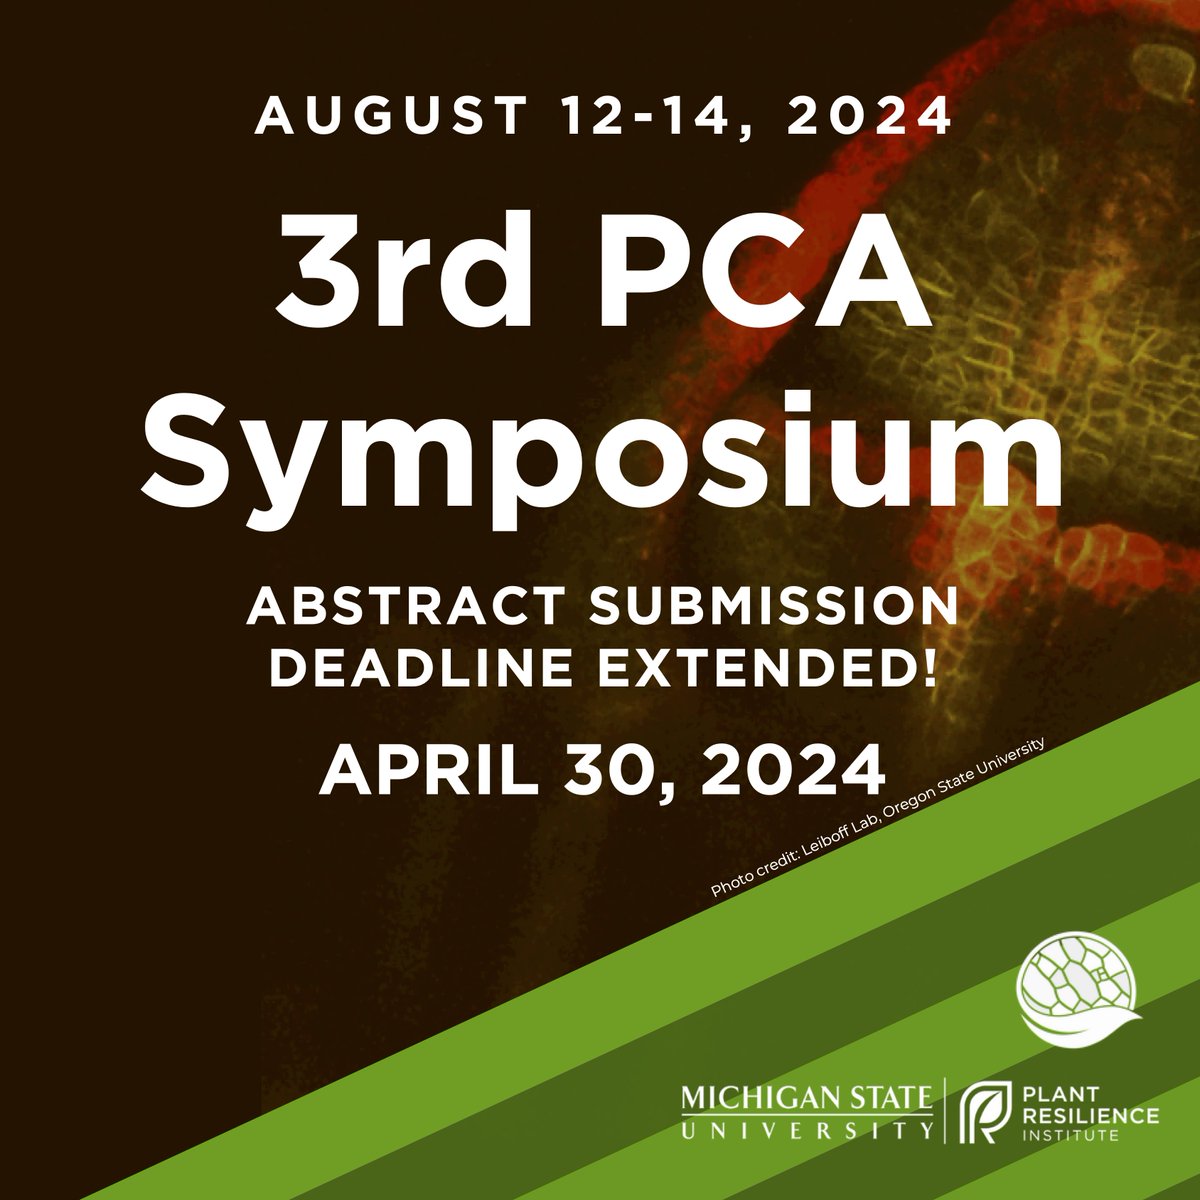 Registration and abstract submissions are still open for the 3rd PCA Symposium! This is a FREE, virtual event! Abstract submissions for talks close April 30th. Abstracts: bit.ly/49oTuKV Registration: bit.ly/PCASymp3Reg